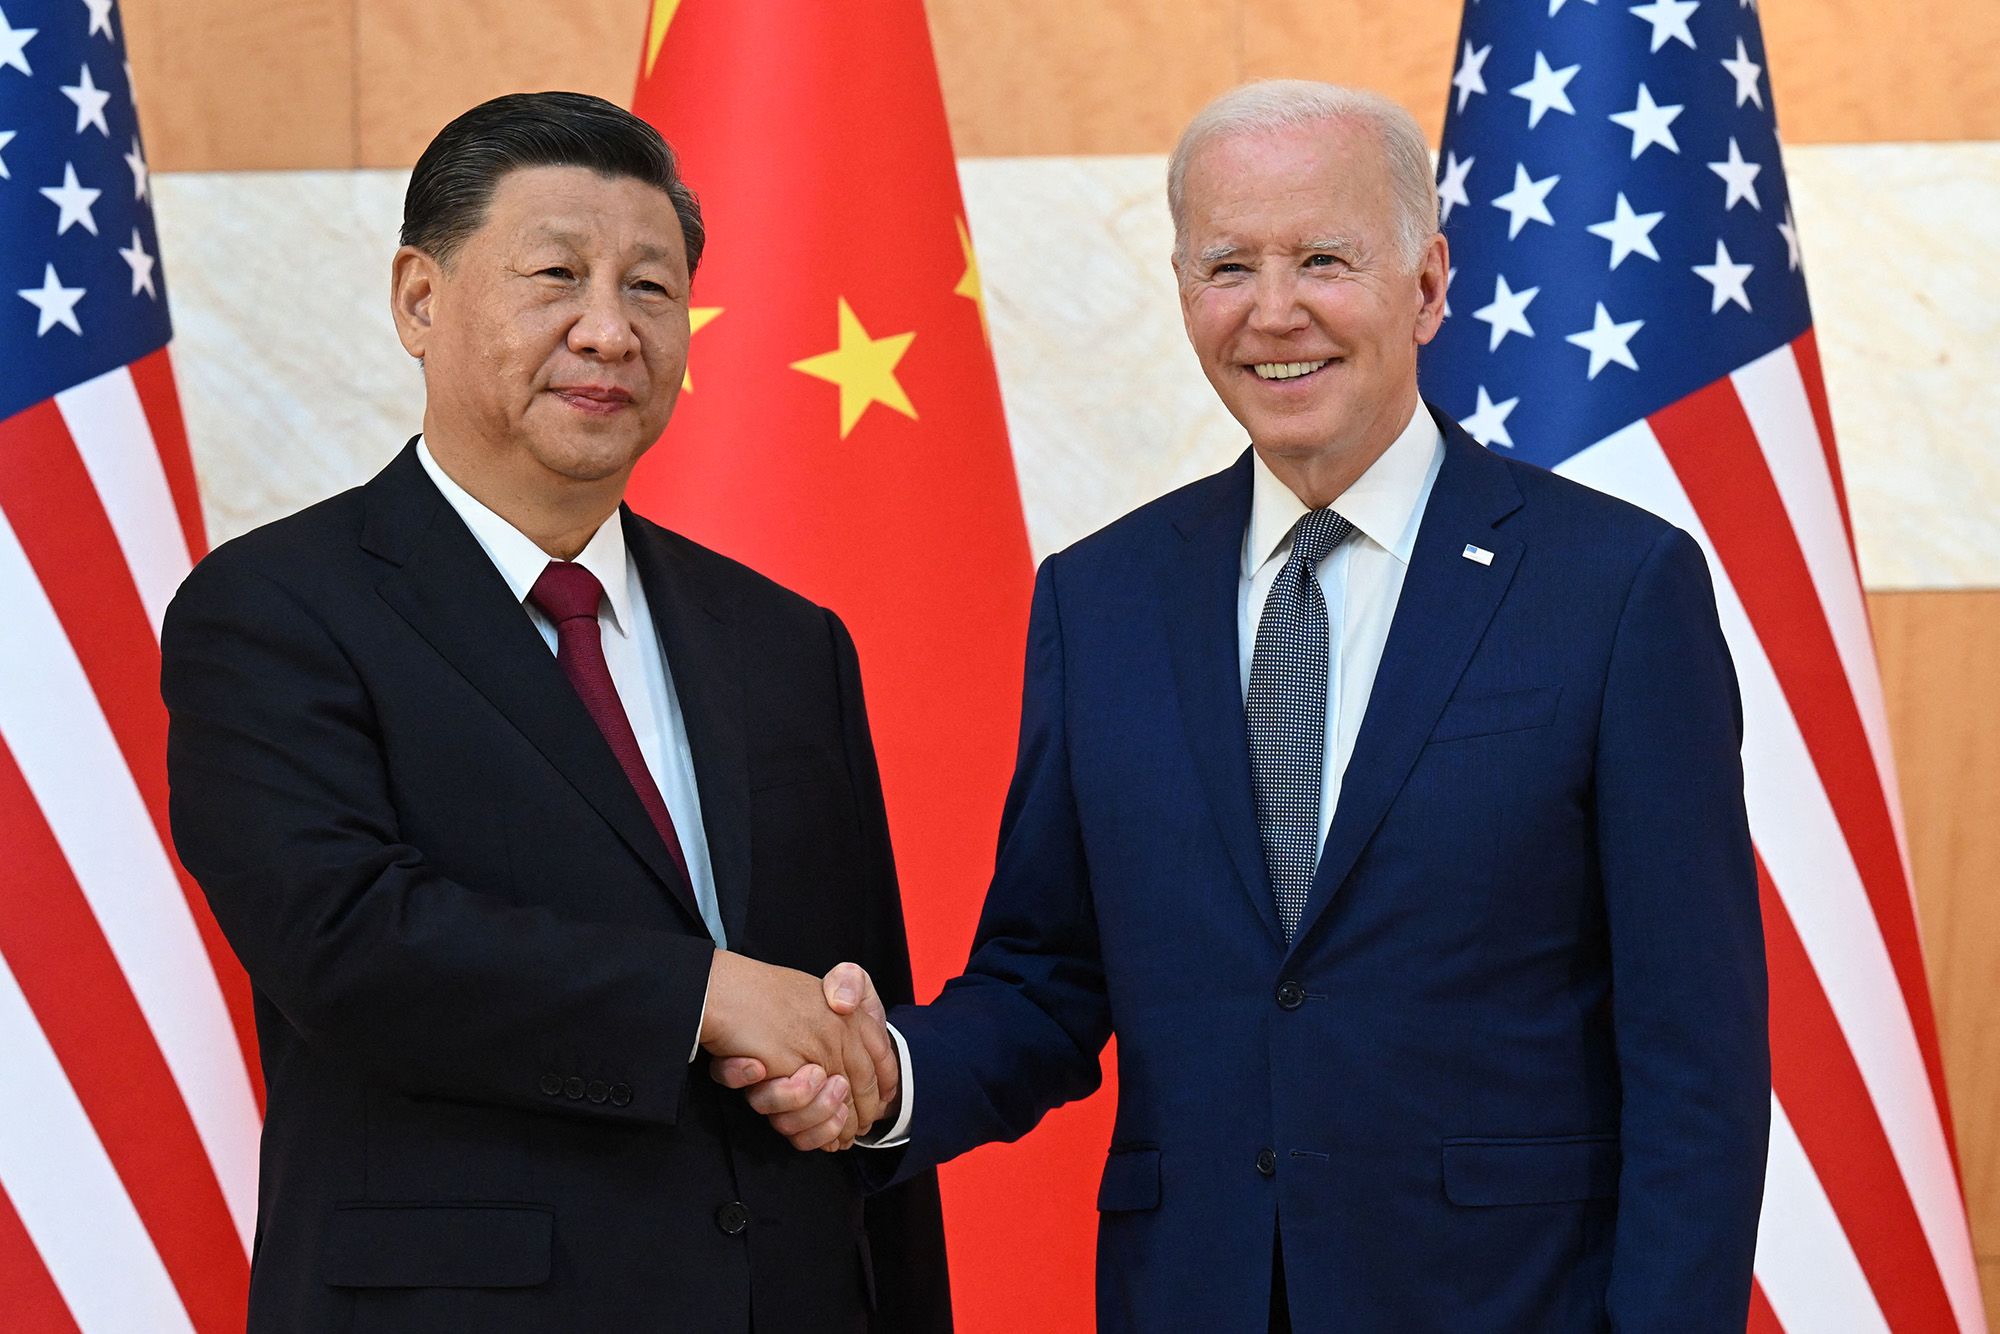 US President Joe Biden, right, and China's President Xi Jinping shake hands as they meet on the sidelines of the G20 Summit in Nusa Dua on the Indonesian resort island of Bali on November 14, 2022.